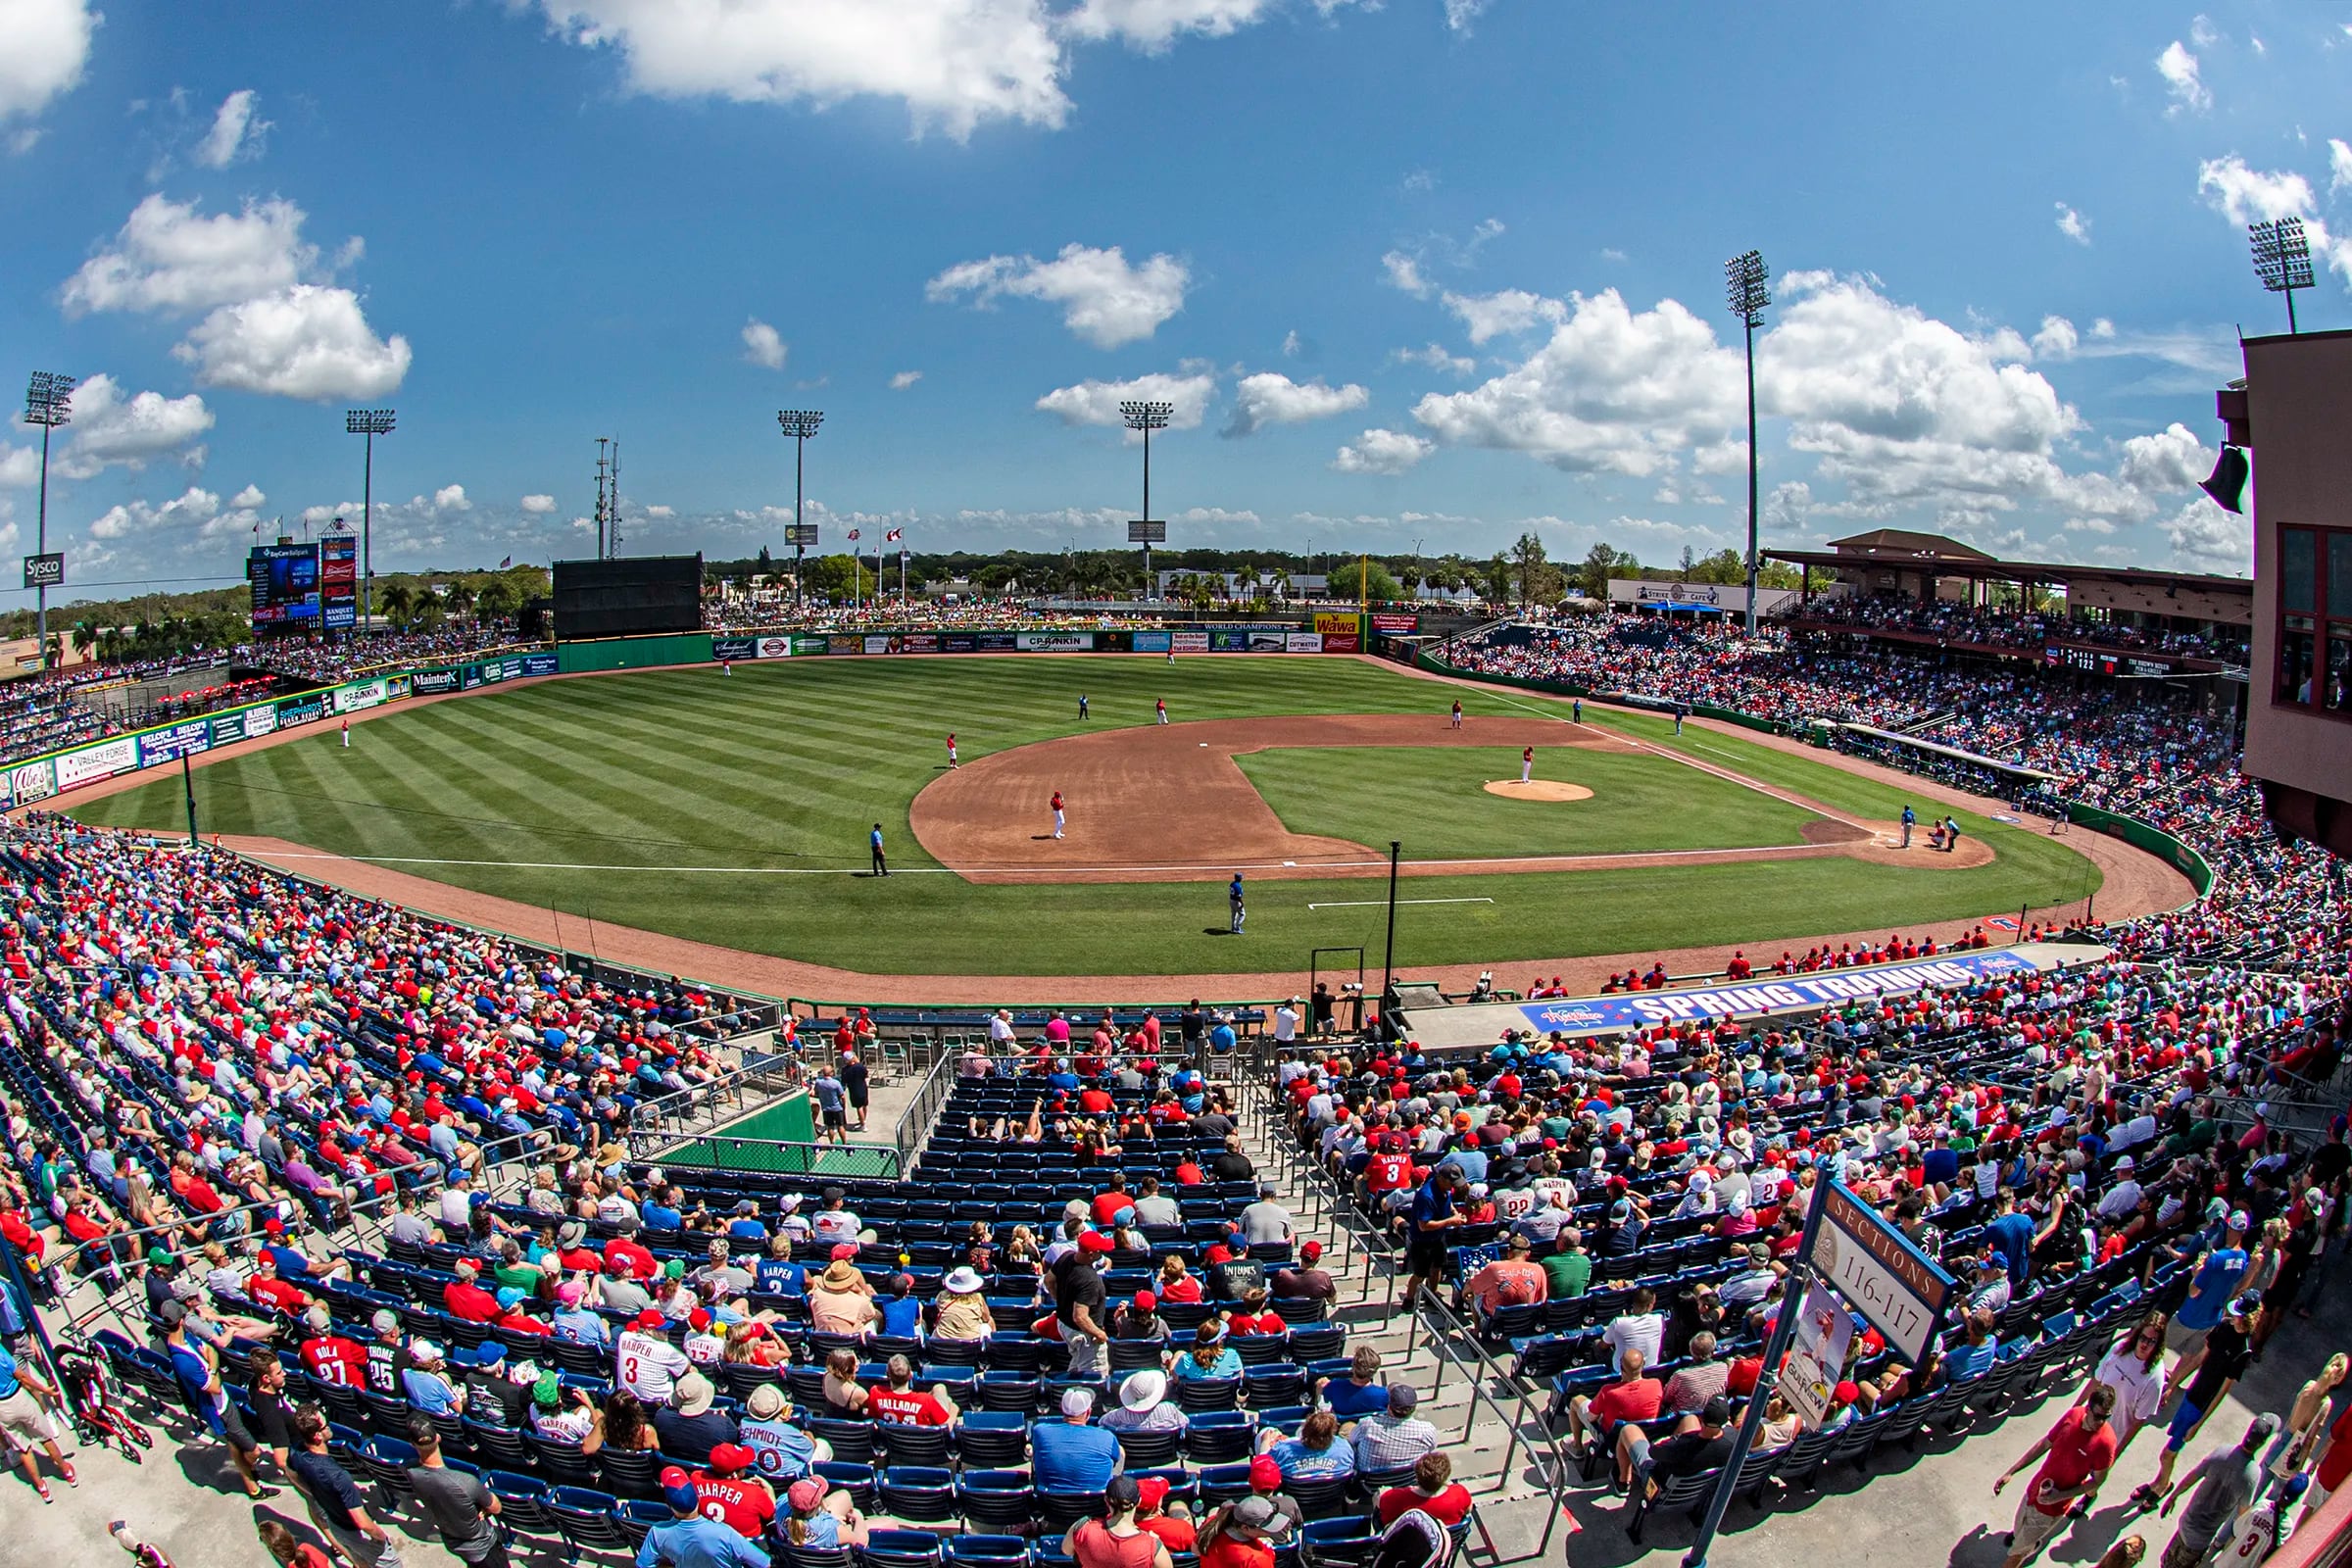 BayCare Ballpark: Phillies spring training stadium in Clearwater